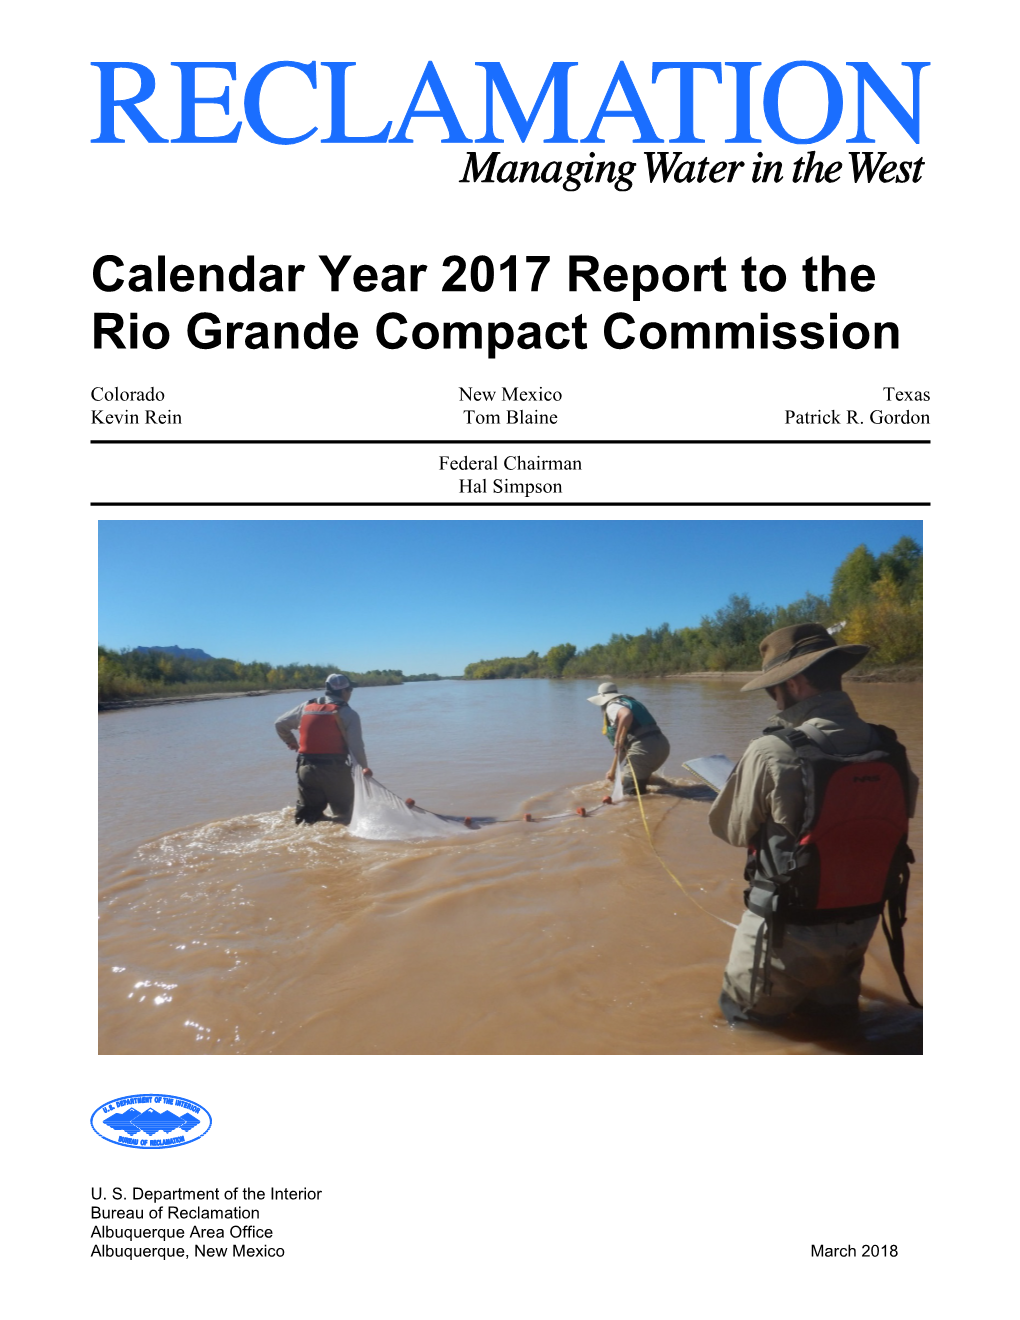 Calendar Year 2017 Report to the Rio Grande Compact Commission